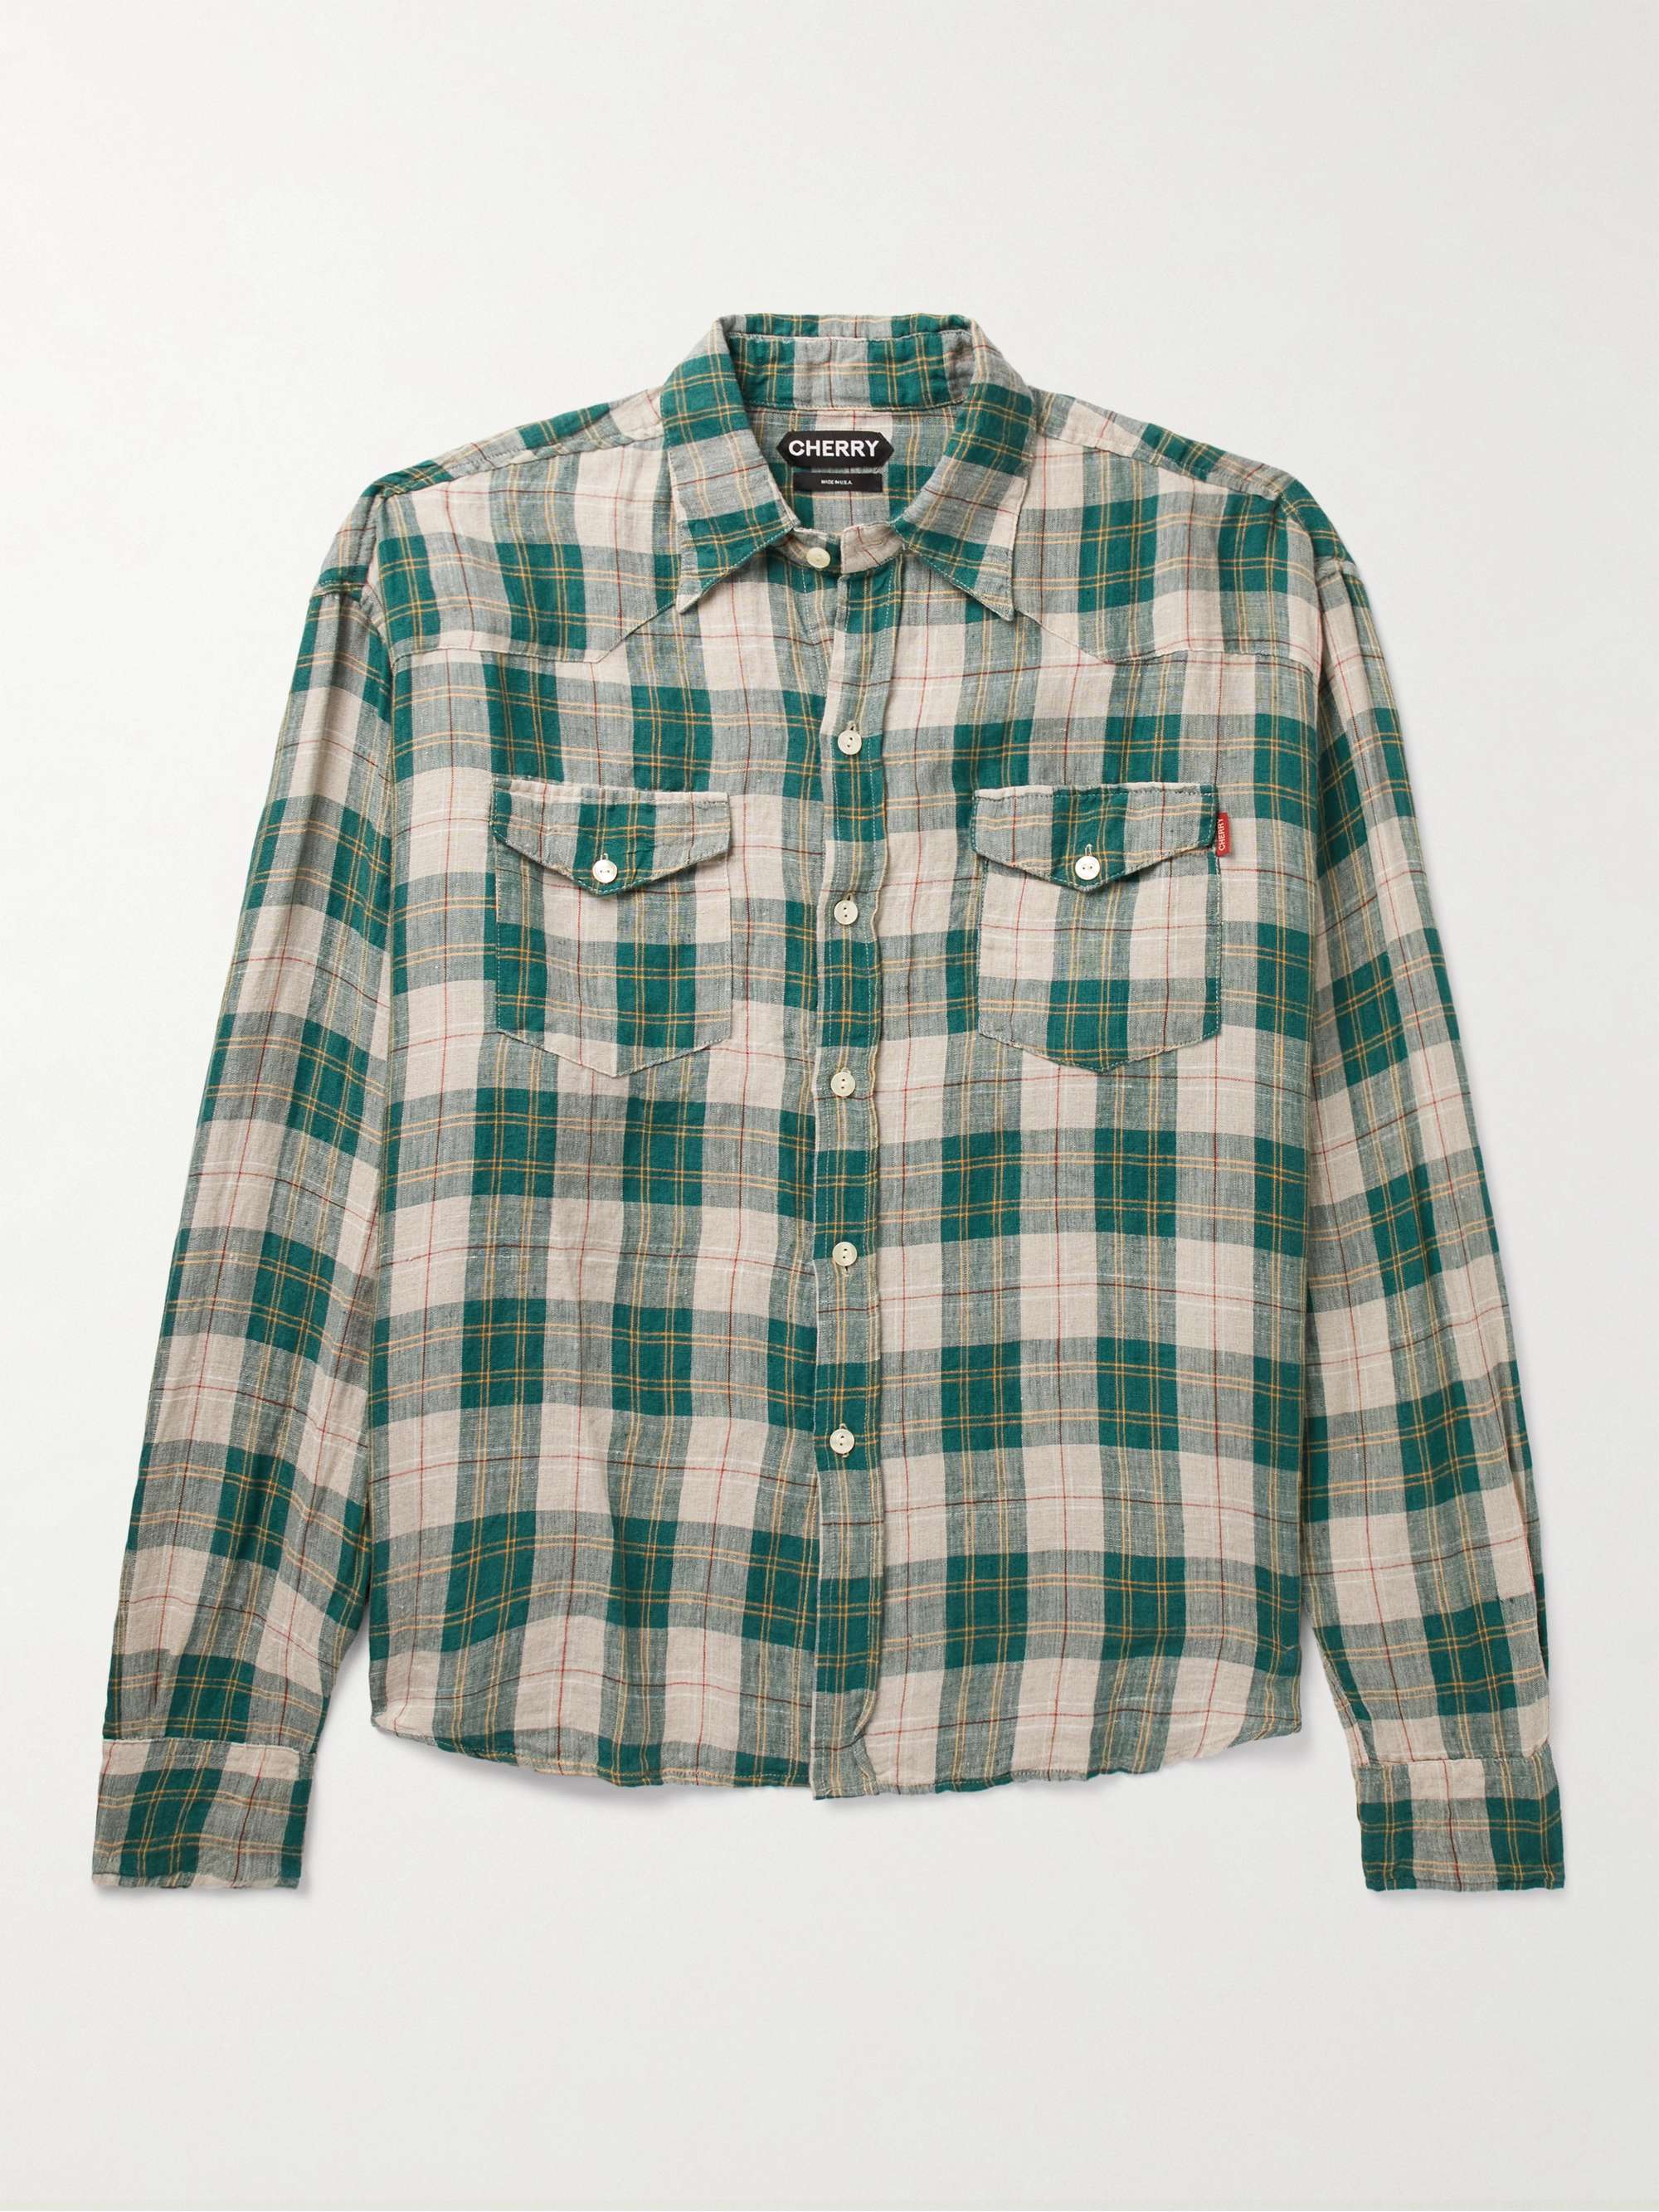 CHERRY LOS ANGELES Big Western Checked Stone-Washed Linen Shirt for Men